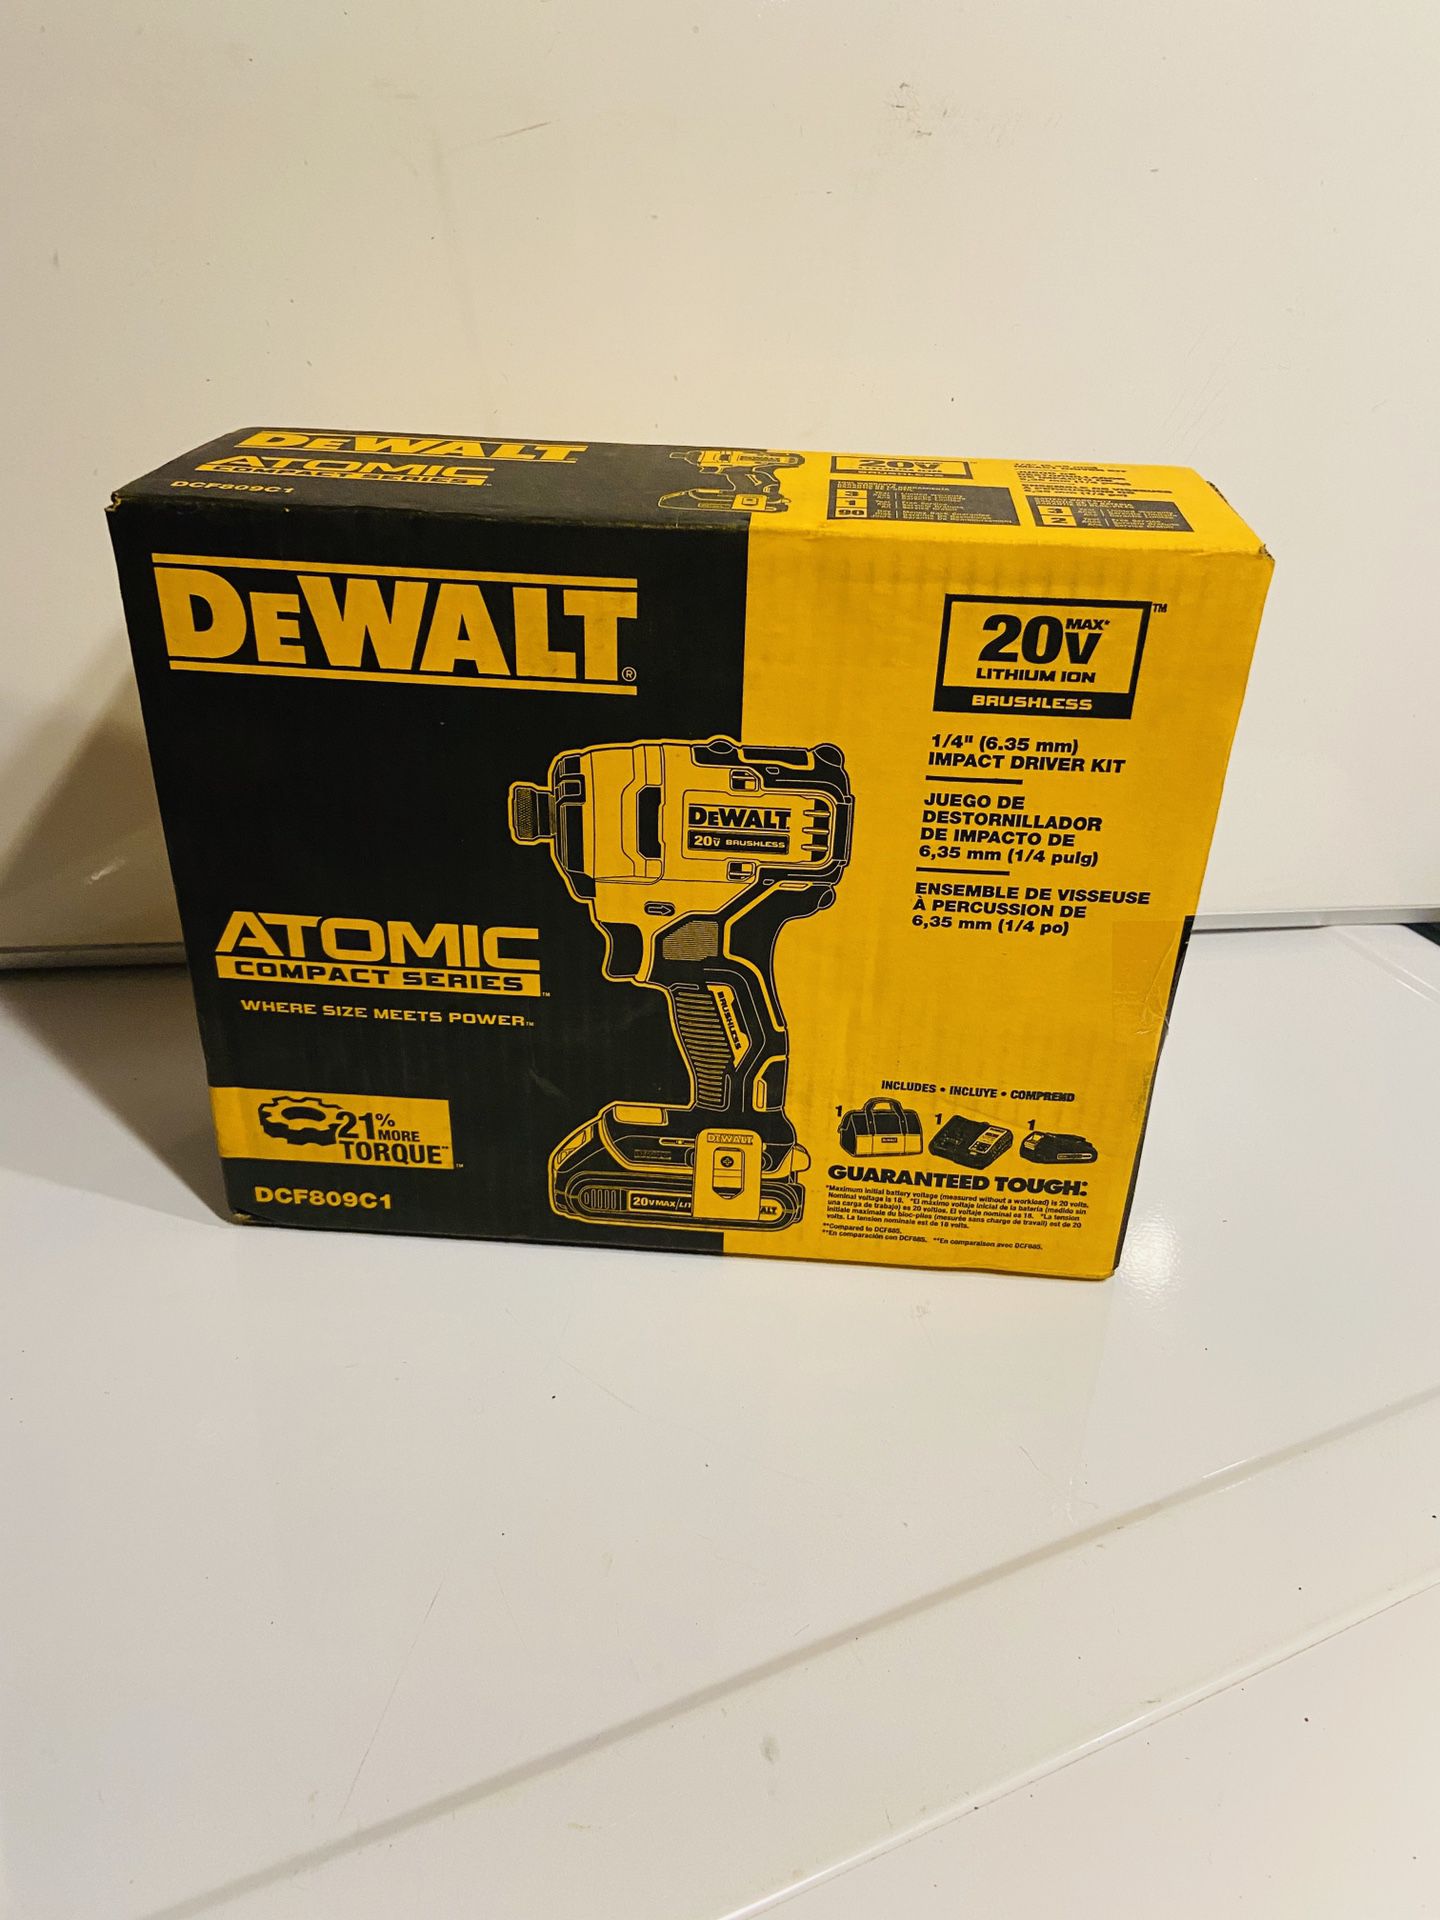 DEWALT ATOMIC 20-Volt MAX Lithium-Ion Brushless Cordless Compact 1/4 in. Impact Driver w/ (1) Battery 1.3Ah, Charger & Tool Bag